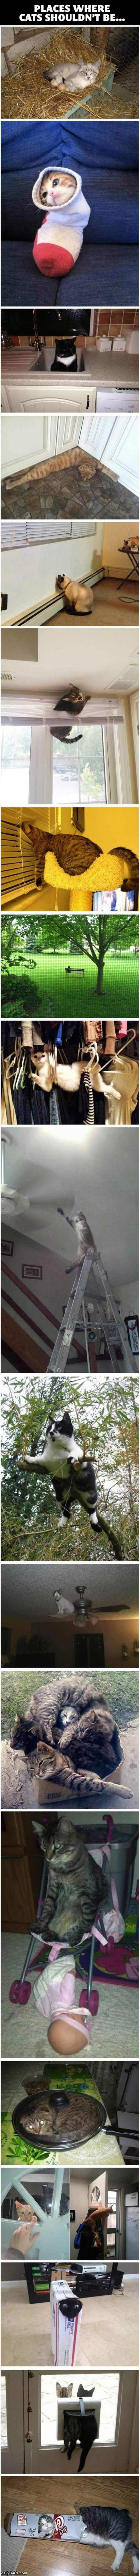 cats in weird places funny picture